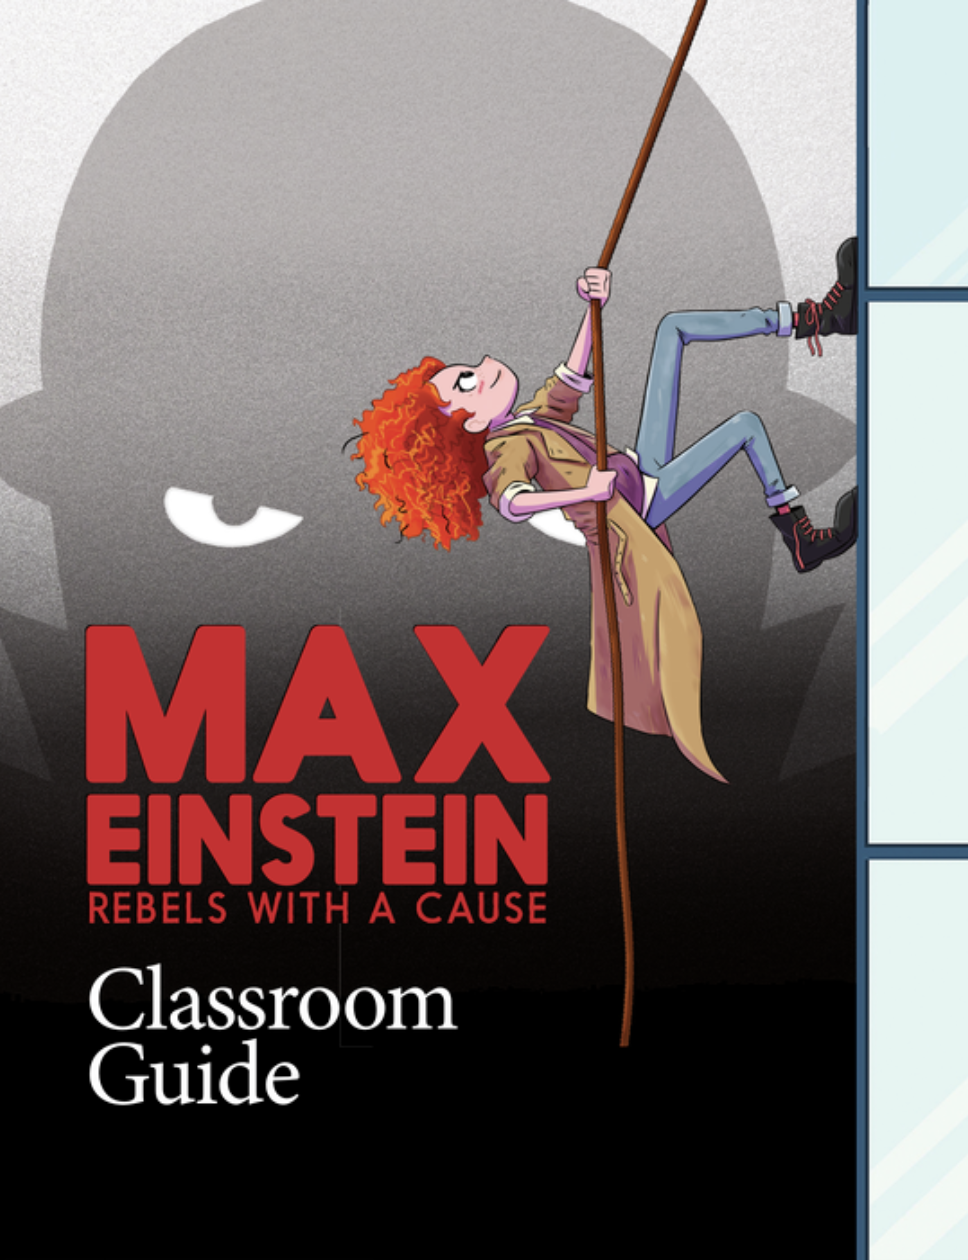 Max Einstein Rebels with a Cause Classroom Guide